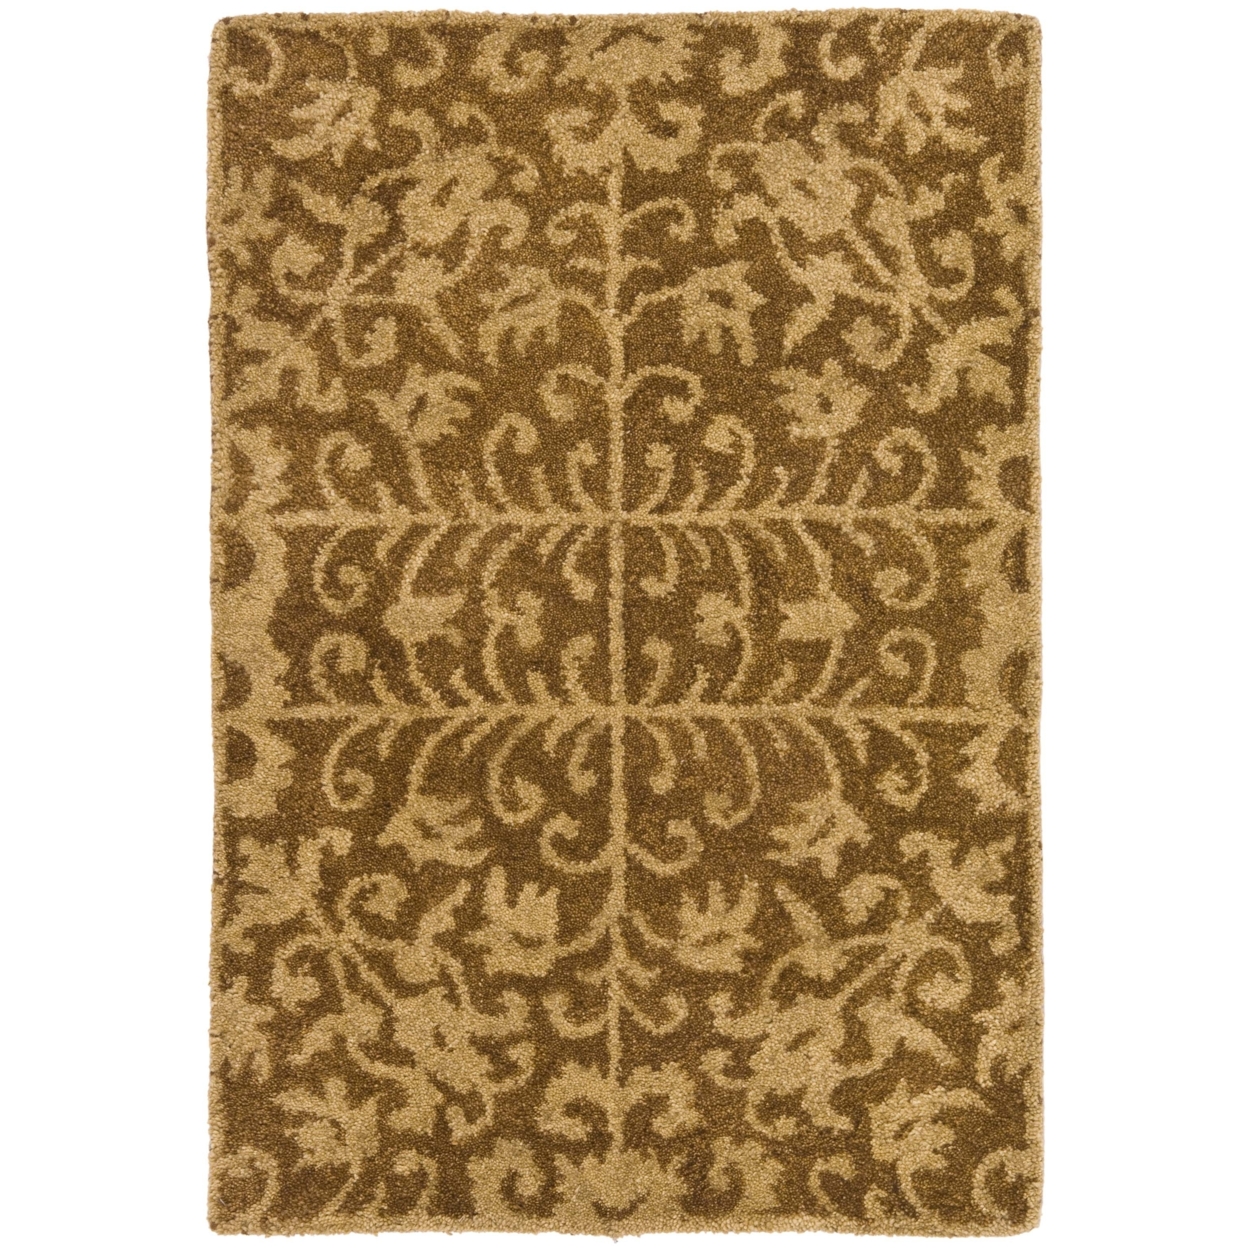 SAFAVIEH Antiquity AT411A Handmade Gold / Beige Rug - 7' 6 X 9' 6 Oval